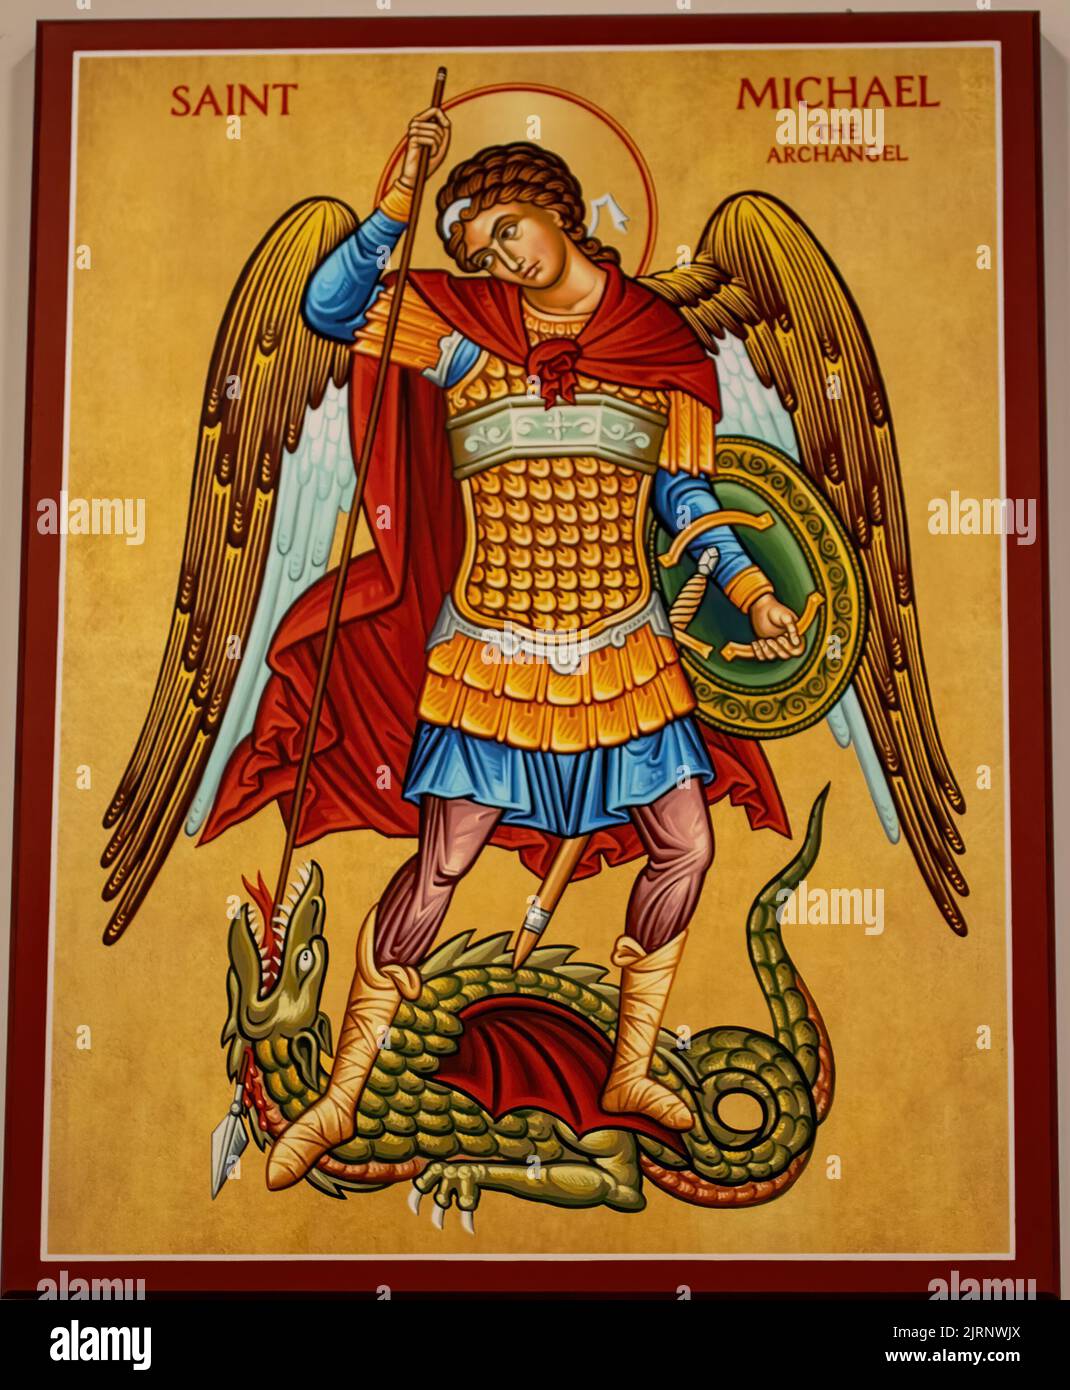 Picture of St. Michael the Archangel defeating the devil. Stock Photo